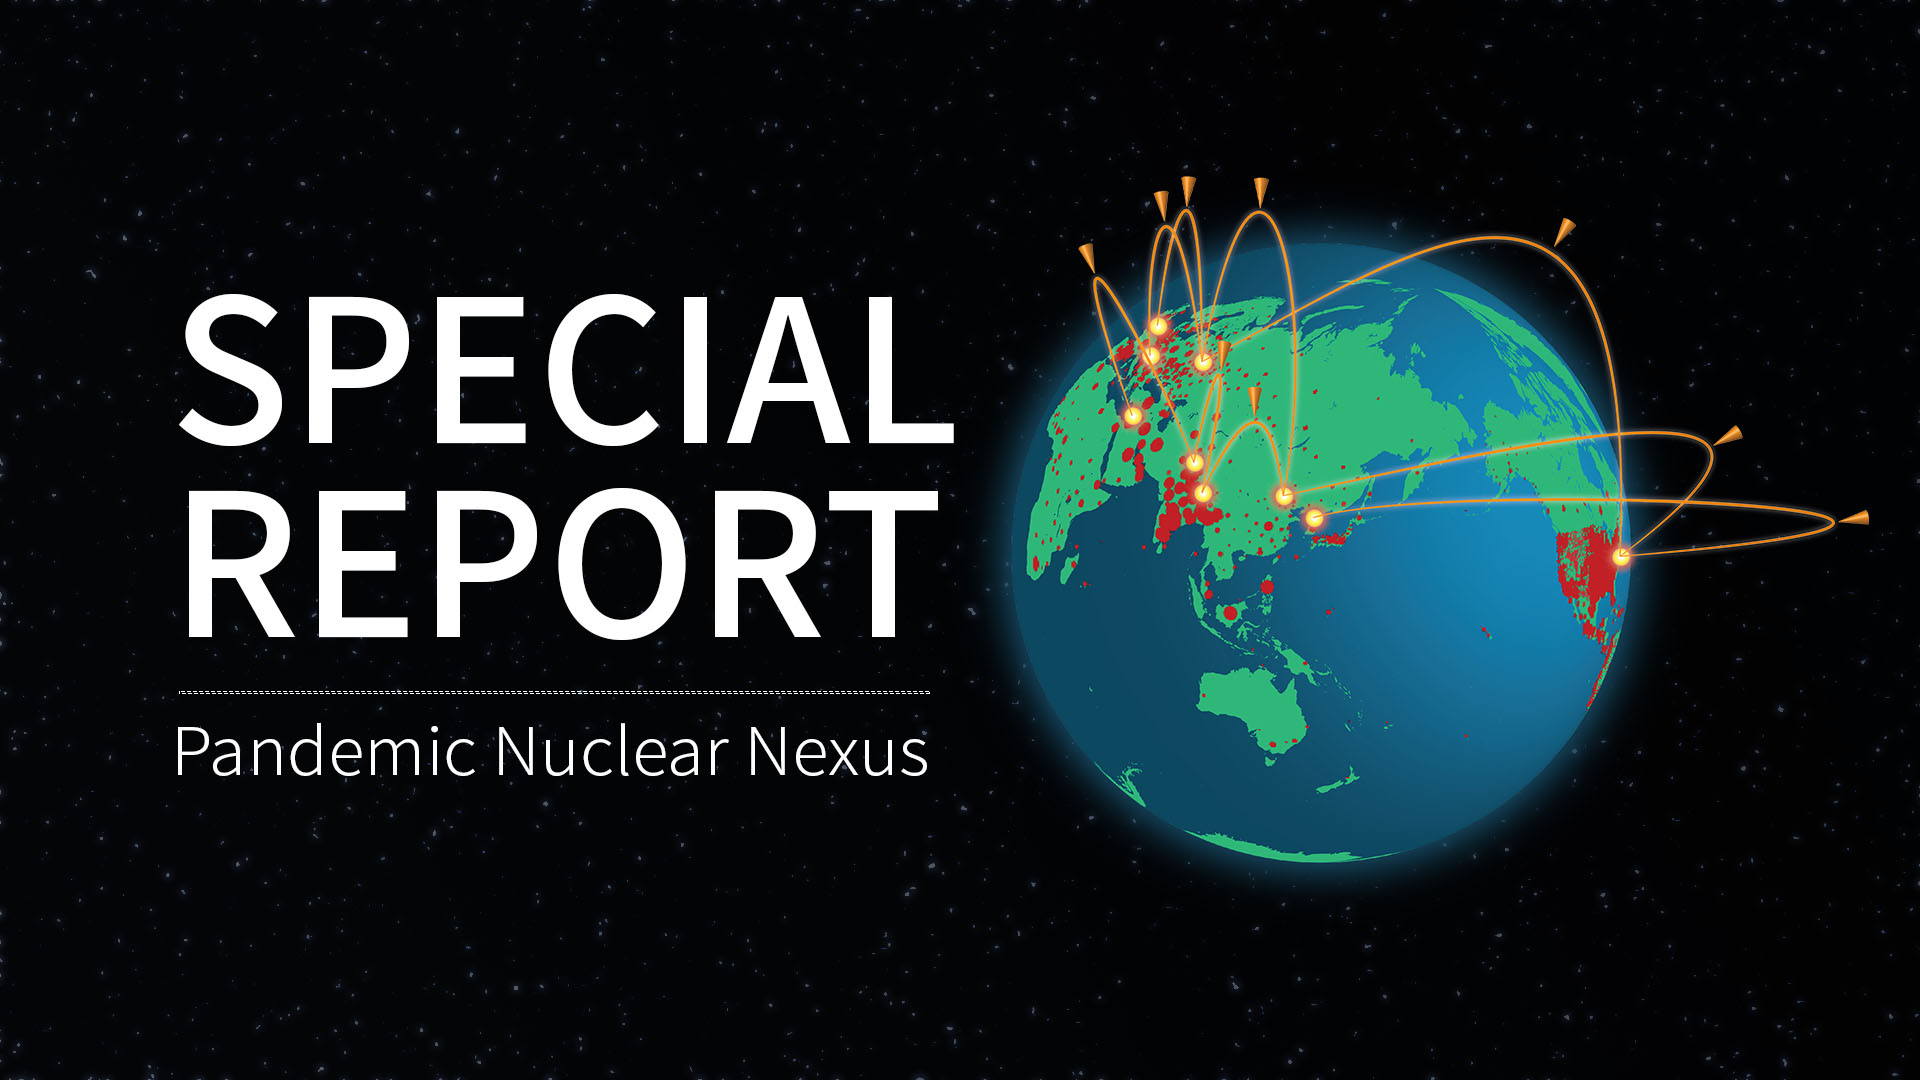 SPECIAL REPORT: Extended Nuclear Deterrence in a Pandemic World